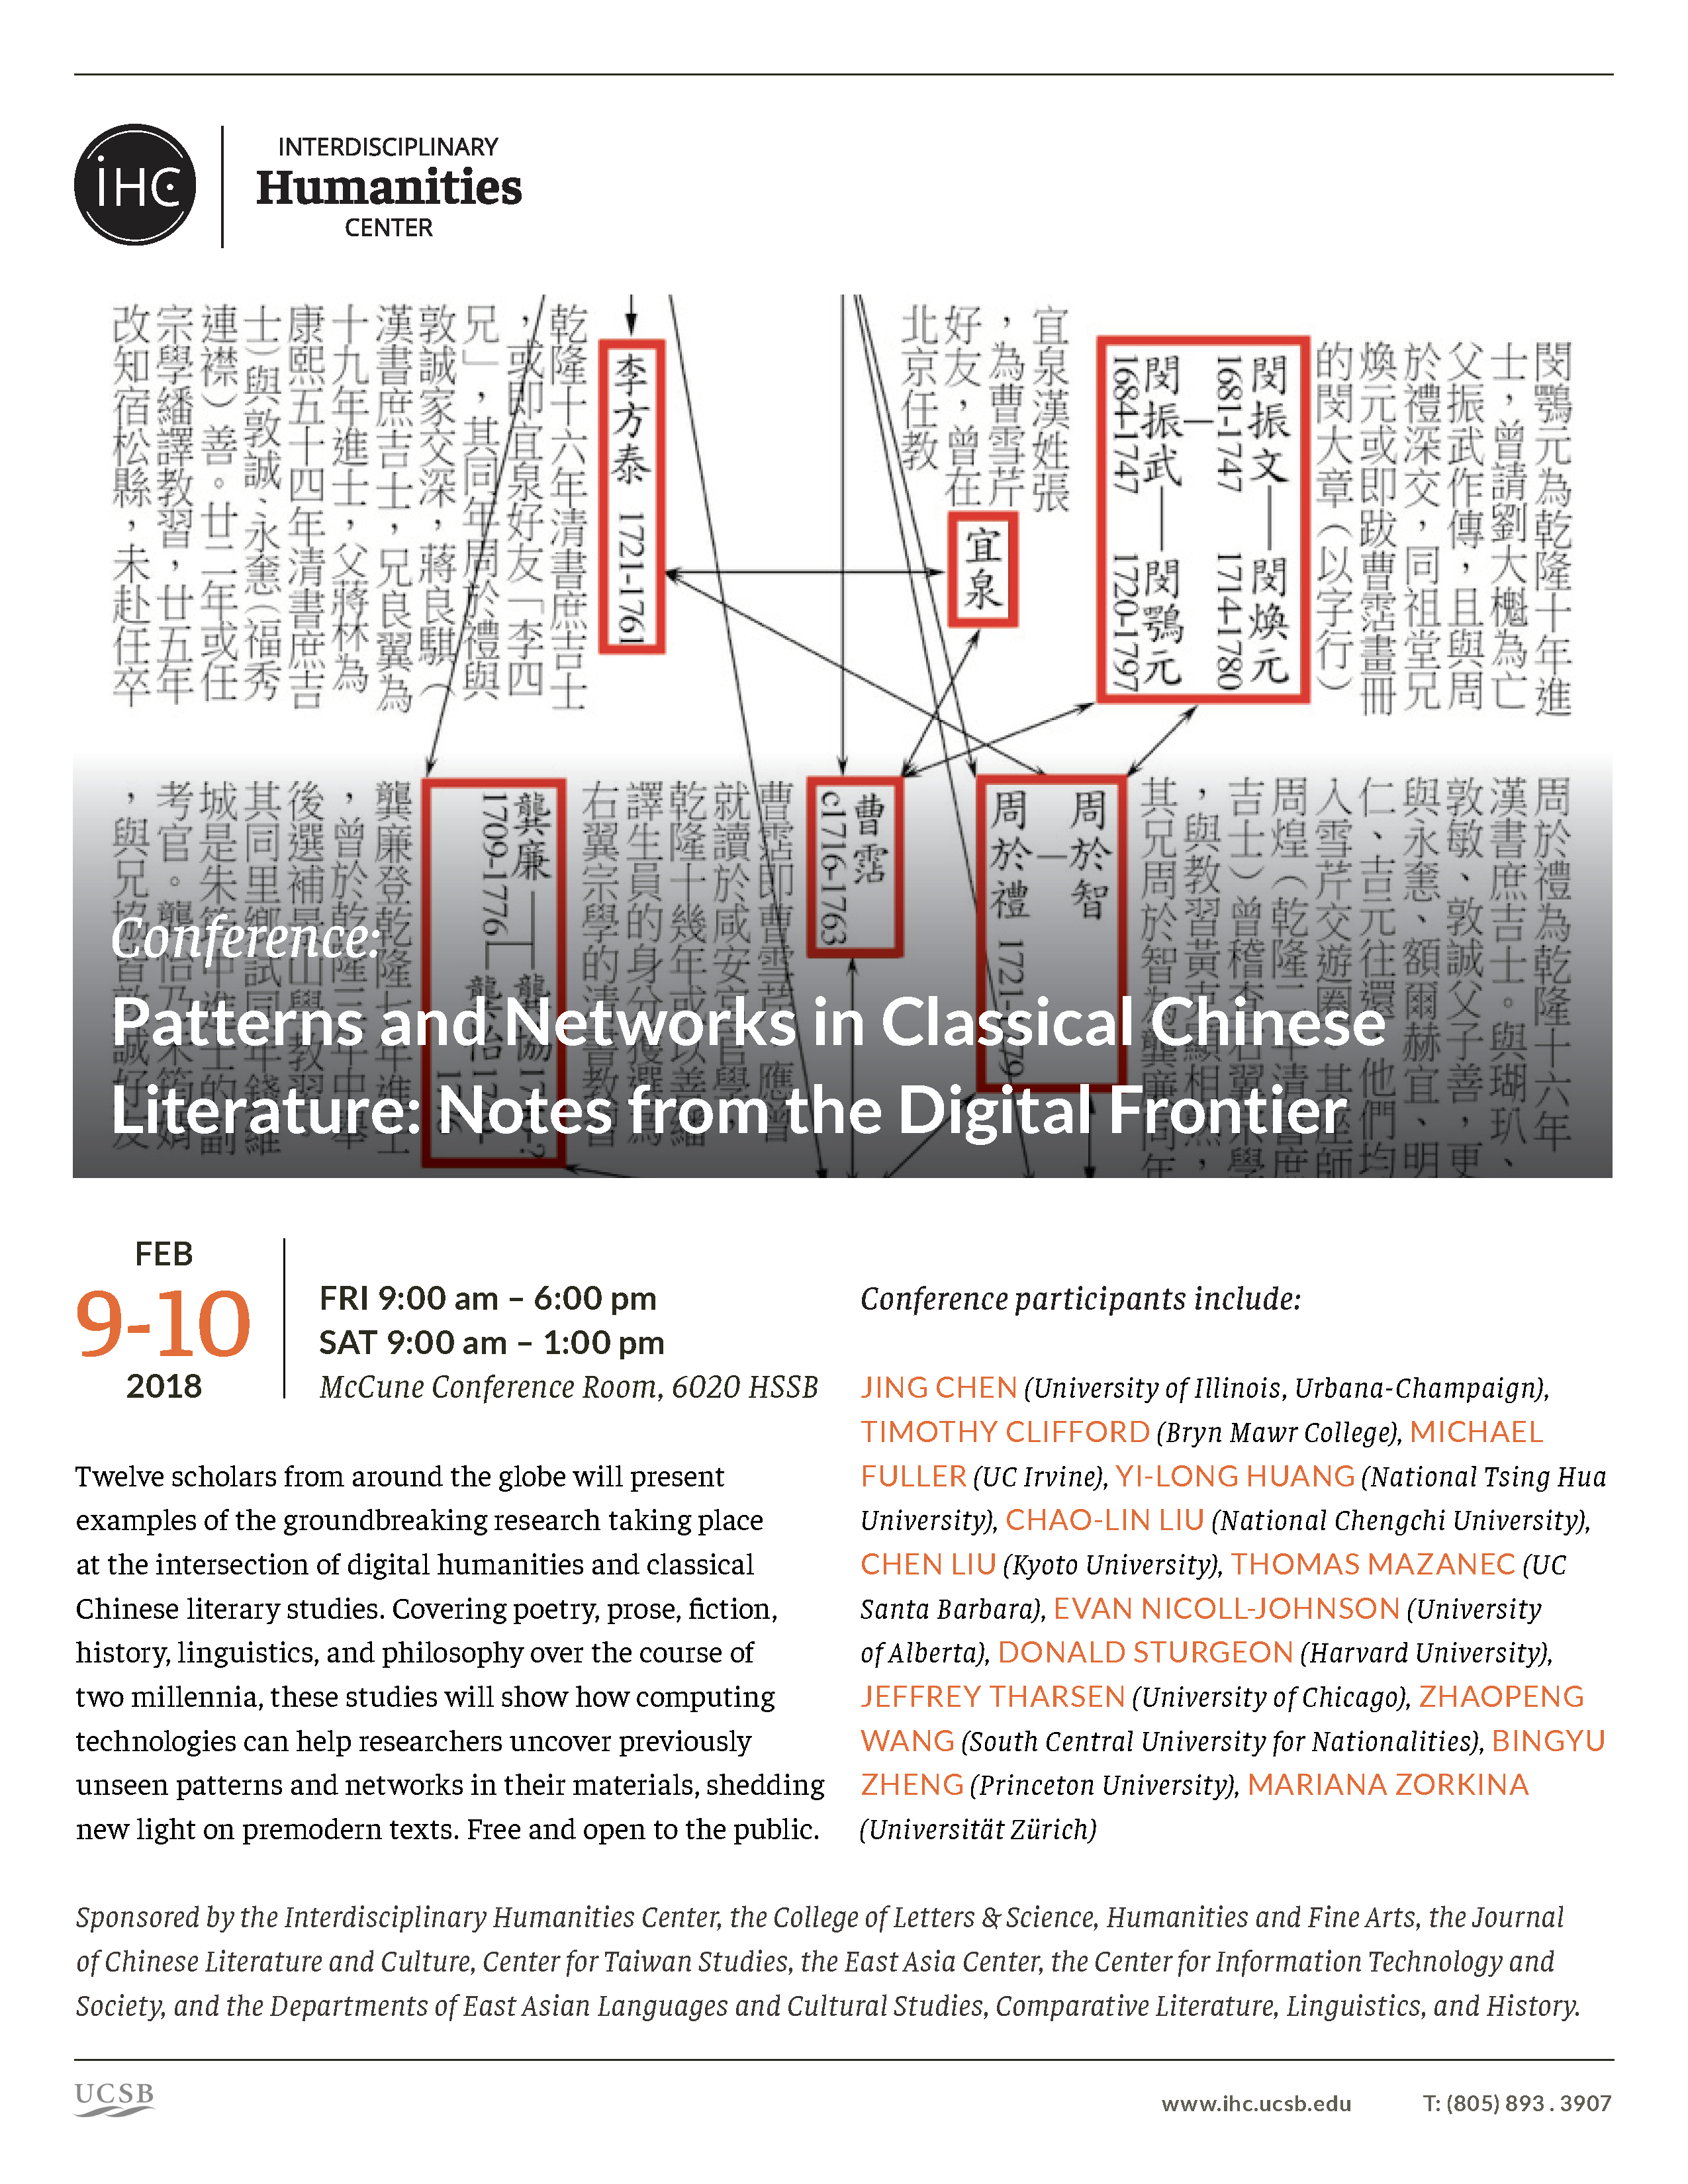 Flyer for Patterns and Networks in Classical Chinese Literature: Notes from the Digital Frontier on 2/9-10/18 for the Interdisciplinary Humanities Center